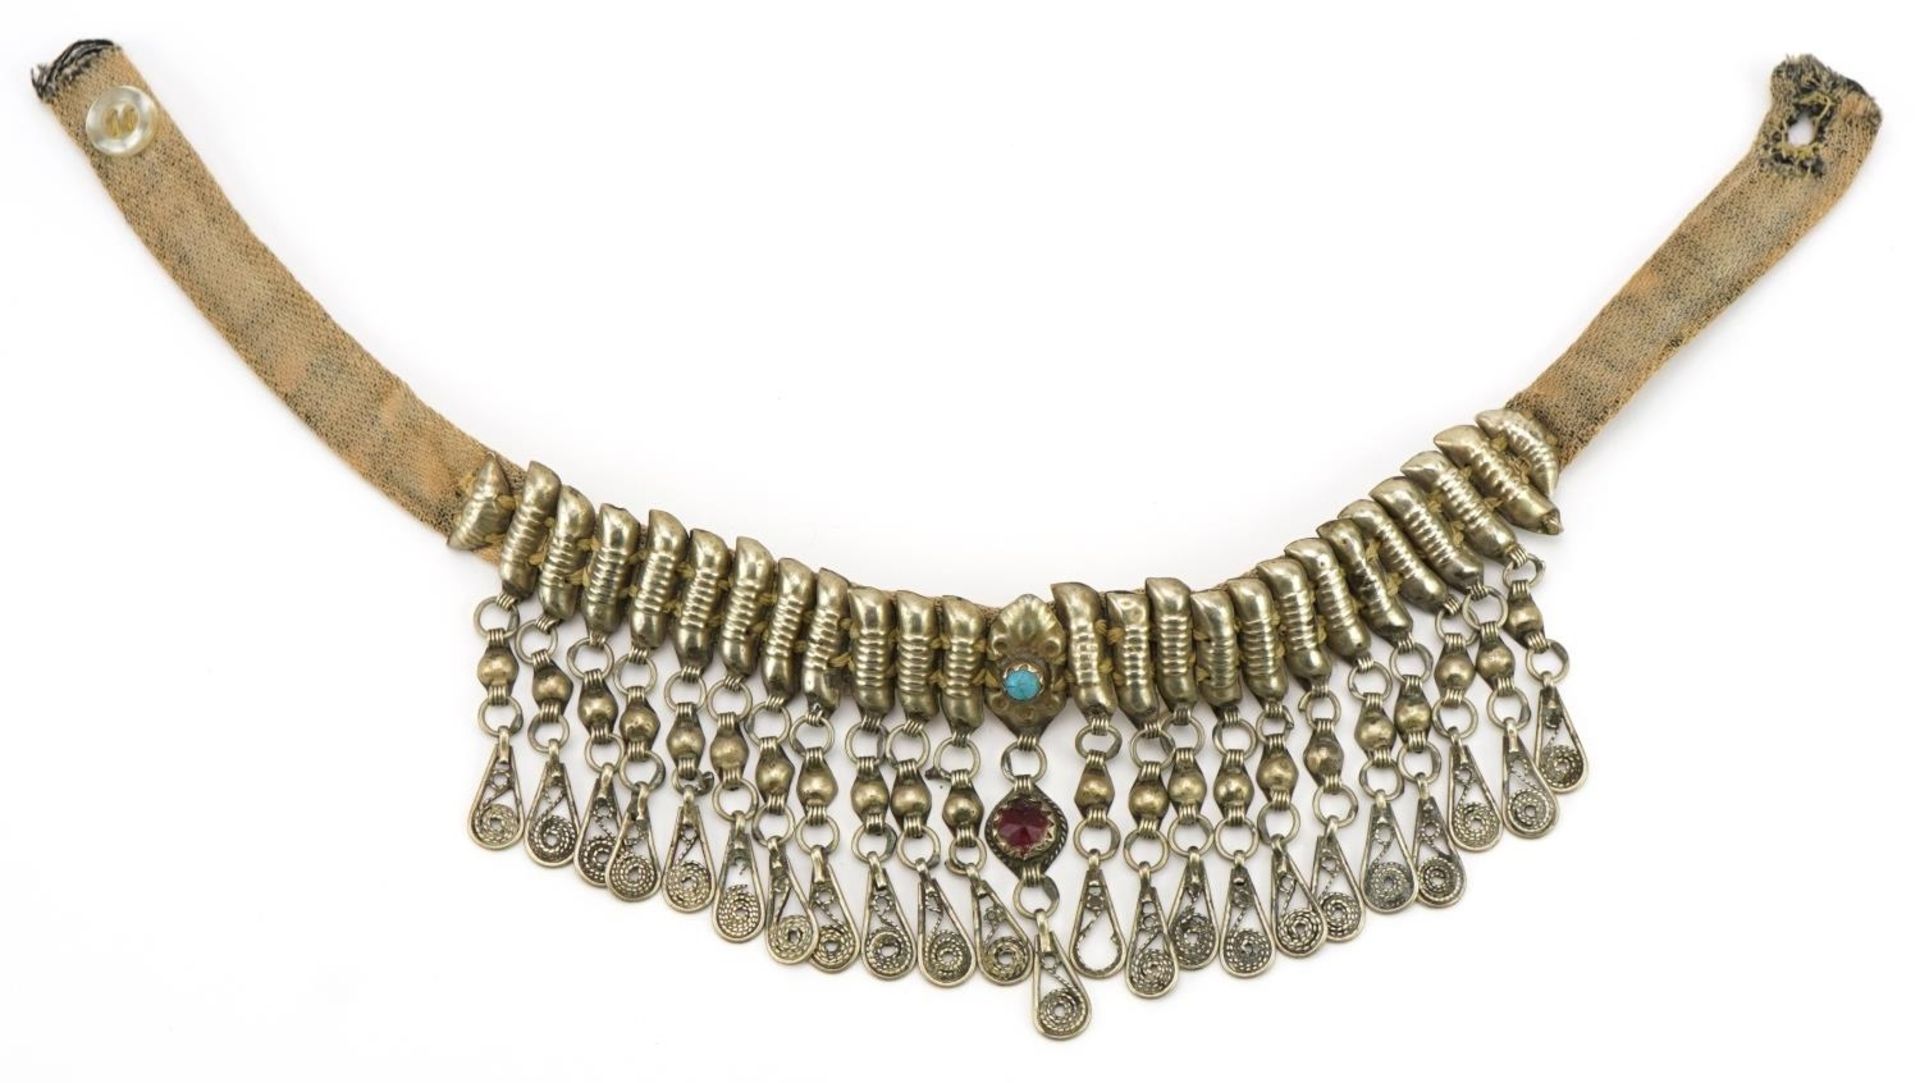 Turkish Ottoman white metal necklace, 33.5cm in length - Image 3 of 6